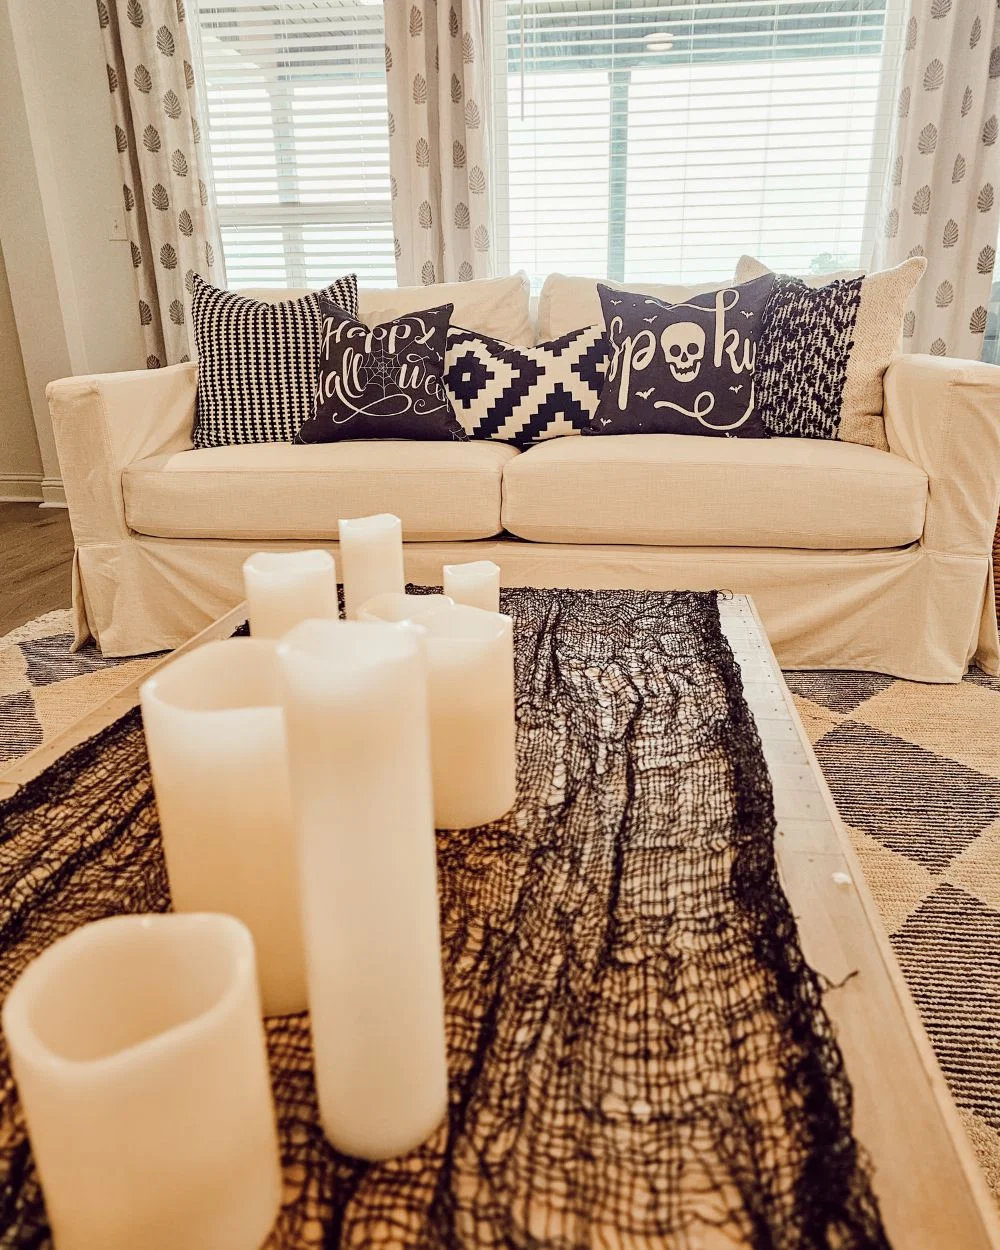 coffee table with candle centerpiece and Halloween pillows on sofa